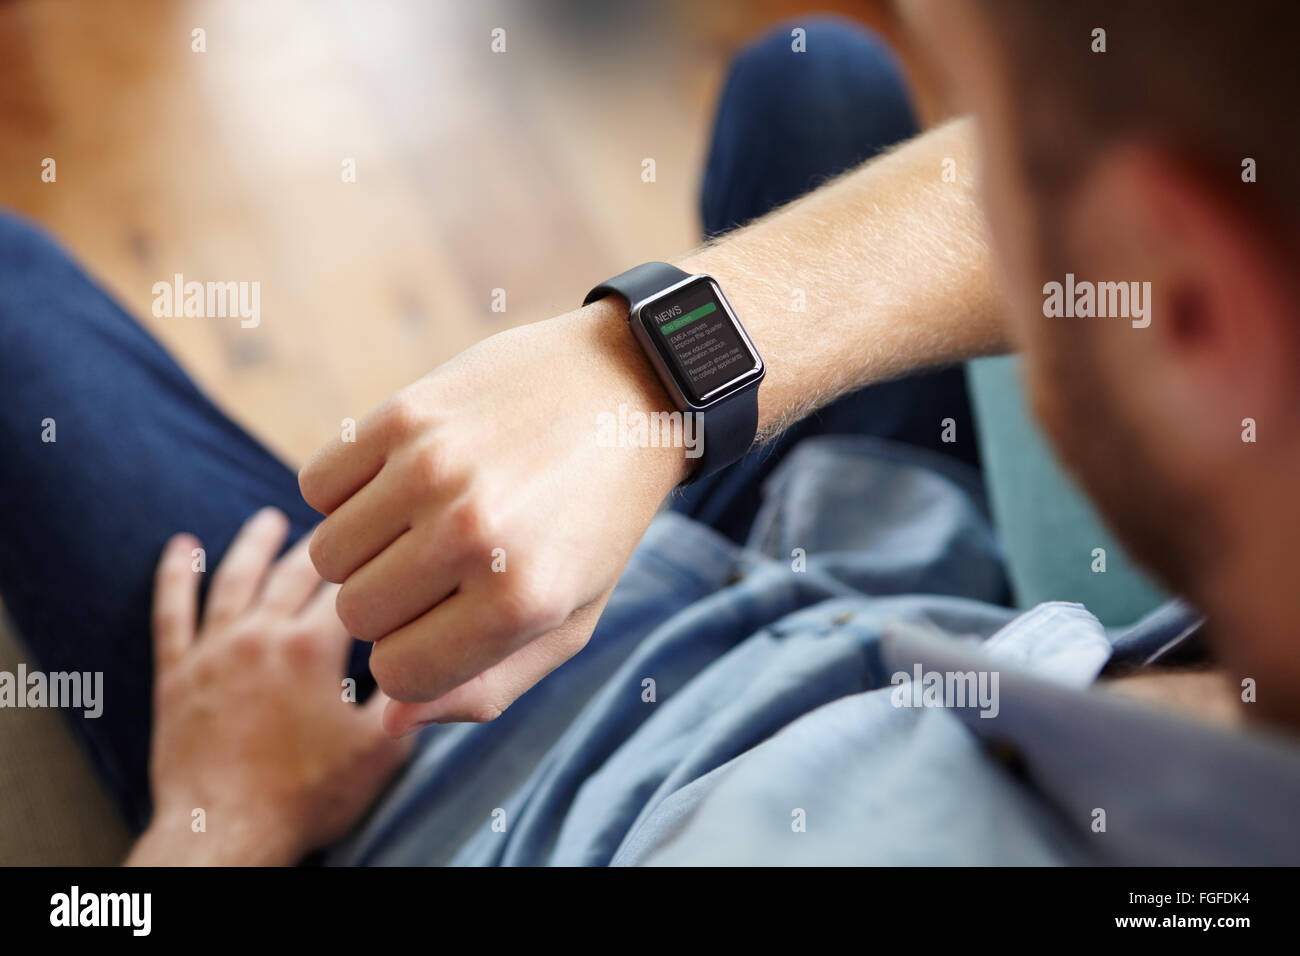 Man Looking At News Application Software On Smart Watch Stock Photo